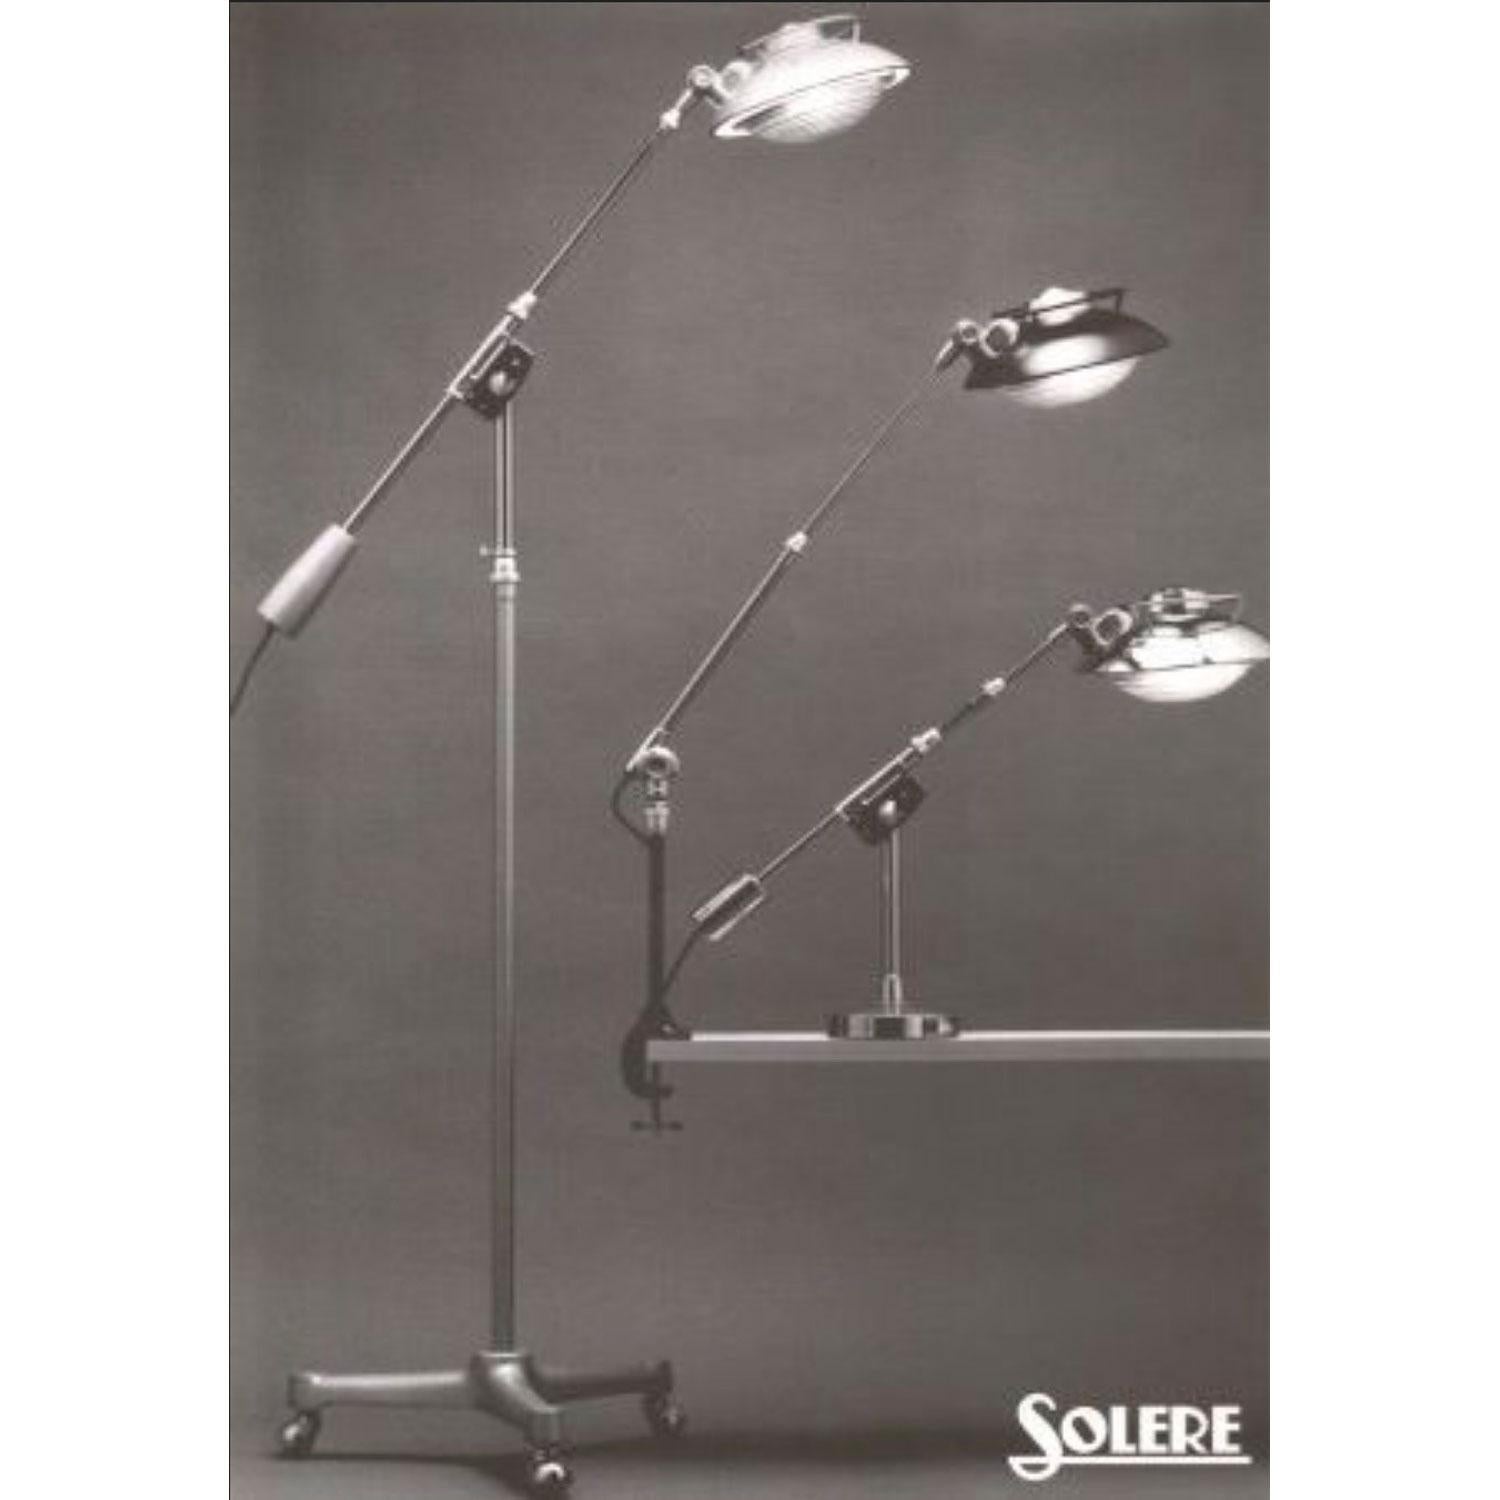 Architect table desk light by Ferdinand Solère for SOLR no. 202 2